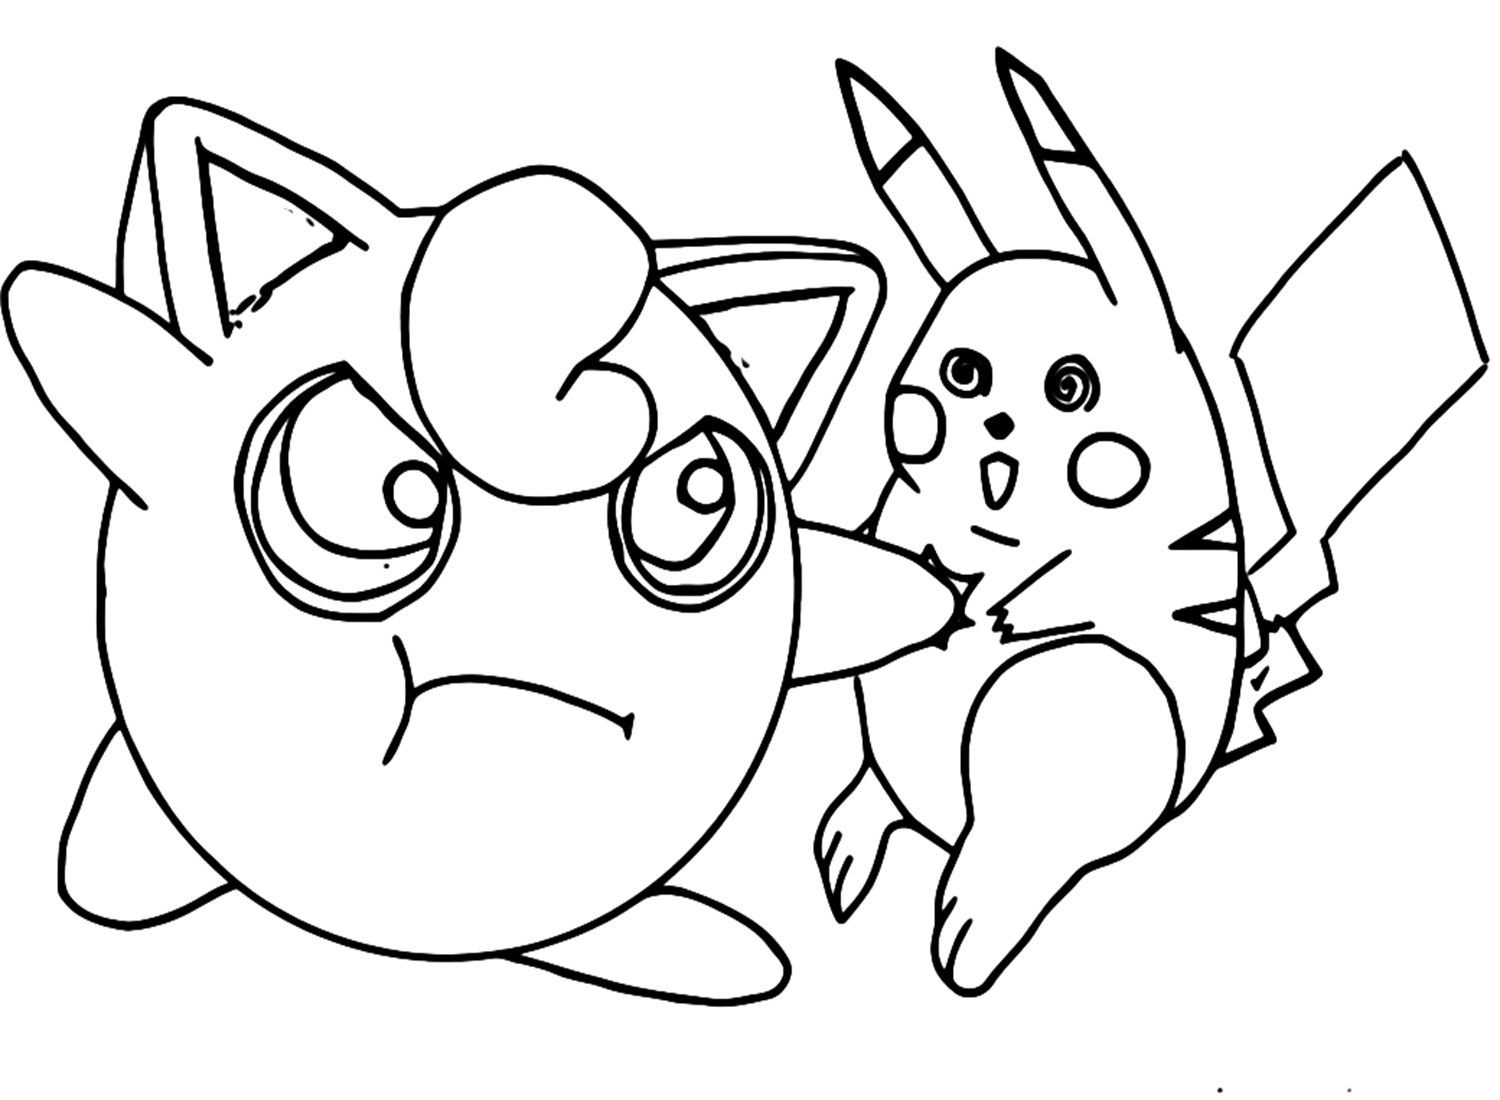 Pikachu And Jigglypuff Coloring Page